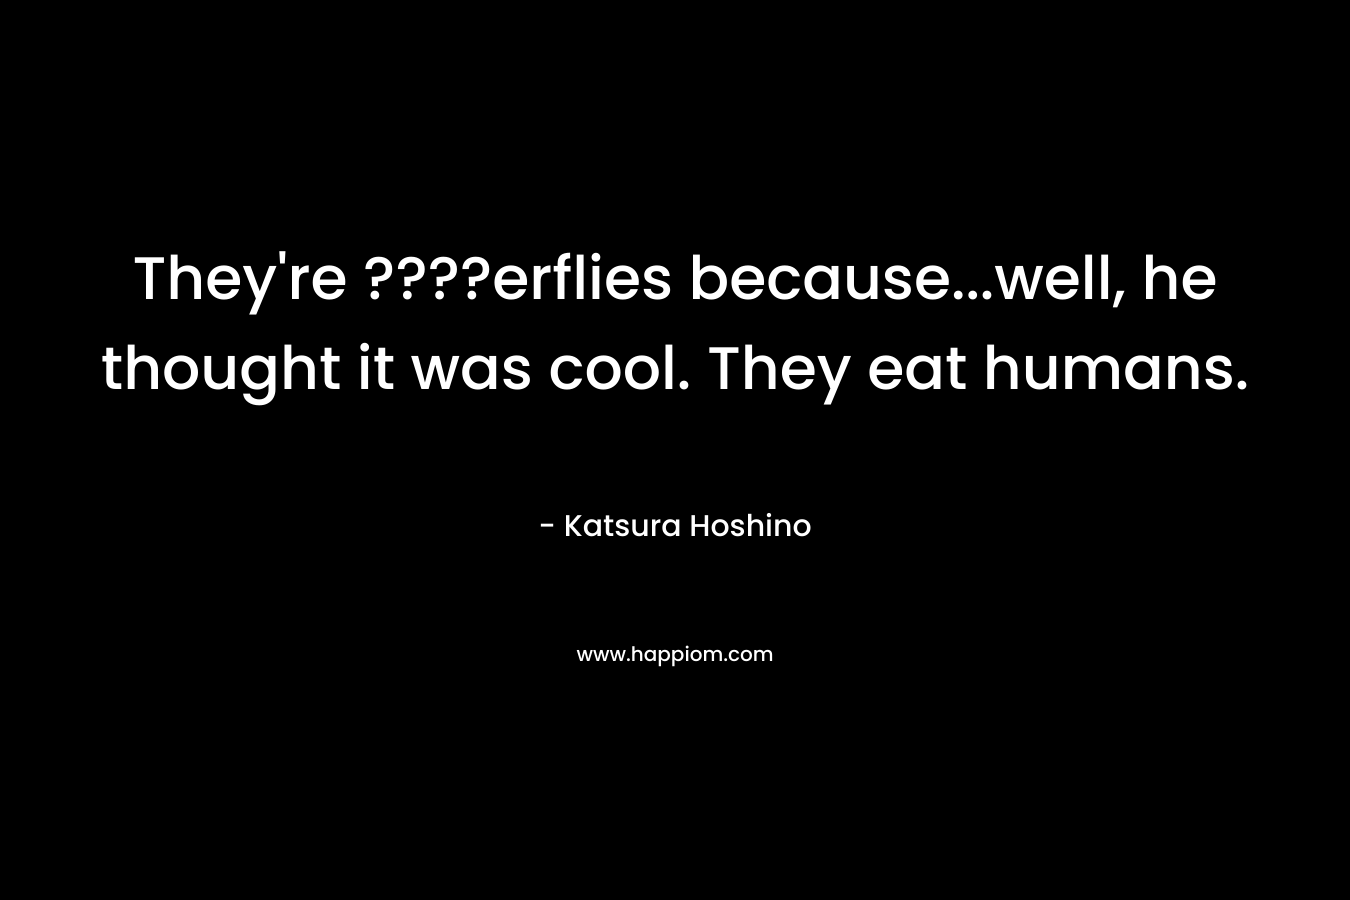 They’re ????erflies because…well, he thought it was cool. They eat humans. – Katsura Hoshino